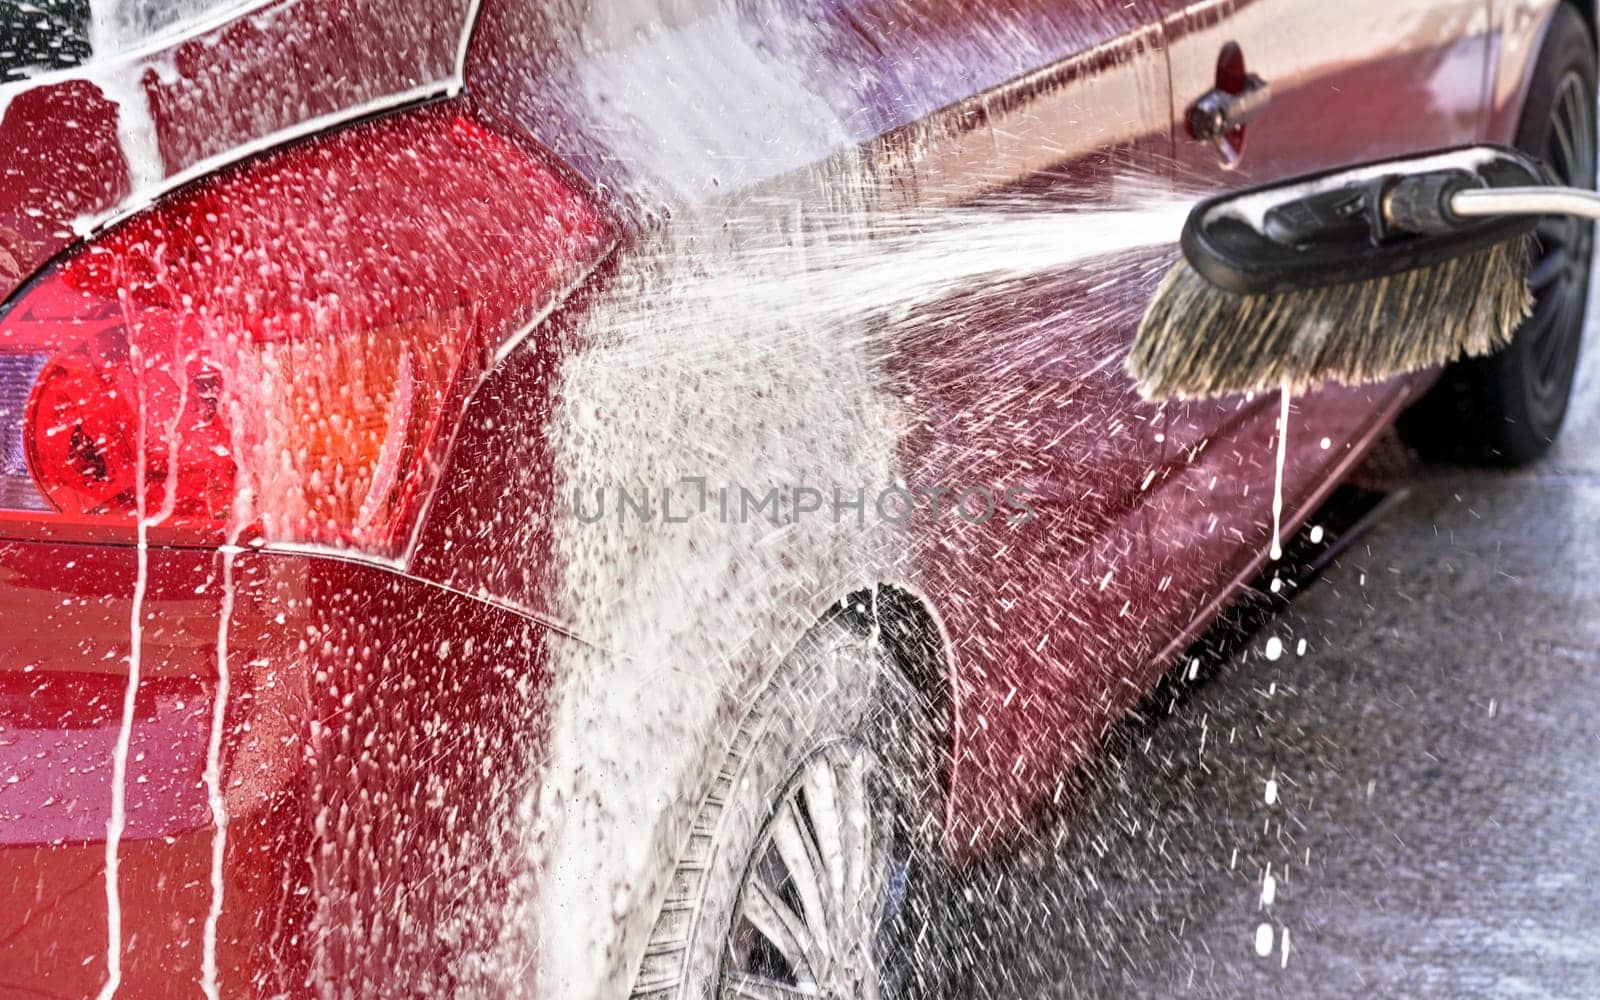 Red car washed in self serve carwash, detail on white soap foam spraying from brush / broom onto side above rear wheel by Ivanko